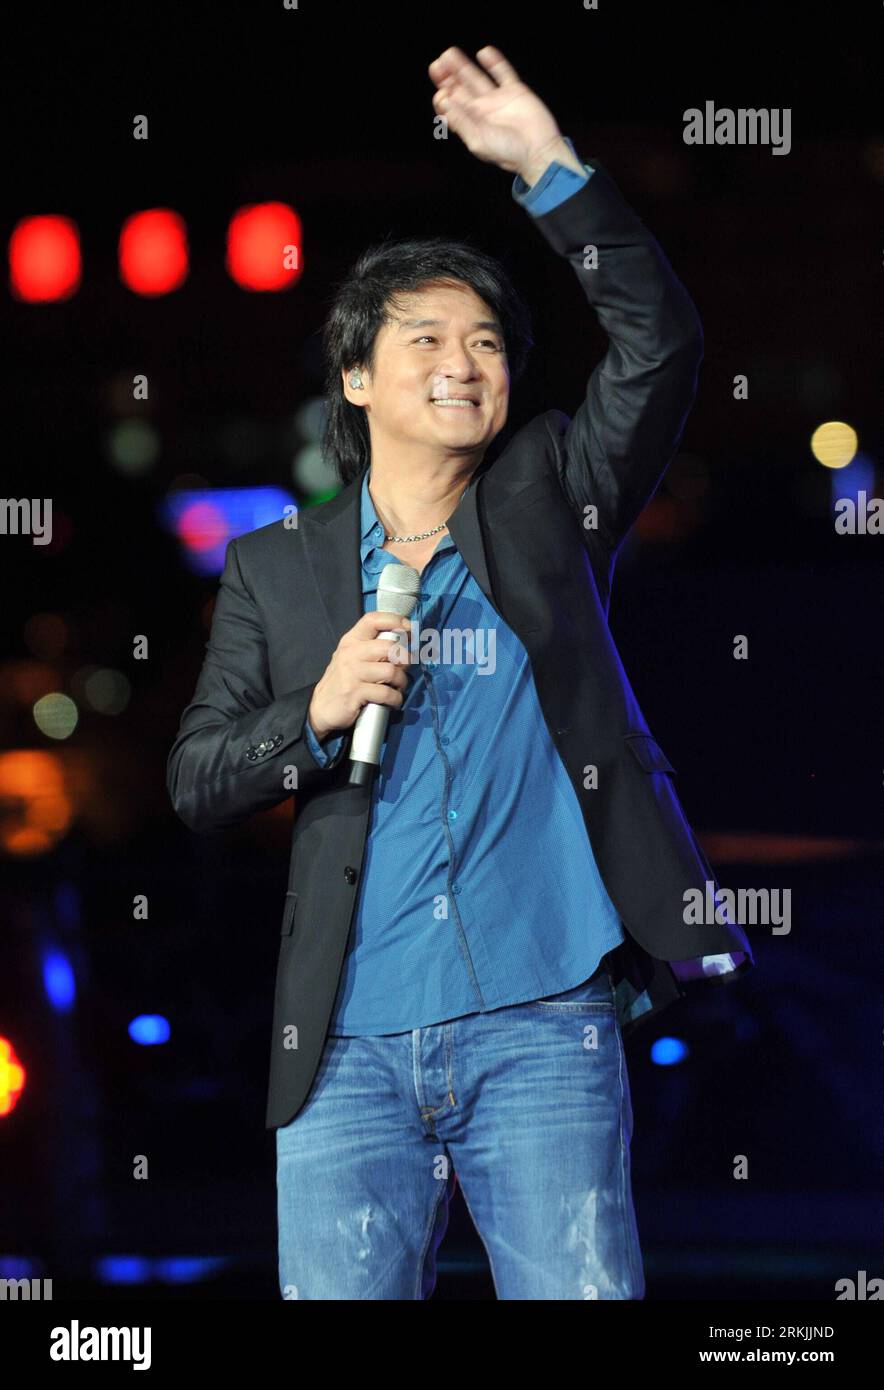 Bildnummer: 56139869  Datum: 01.10.2011  Copyright: imago/Xinhua (111002) -- LIUZHOU, Oct. 2, 2011 (Xinhua) -- Singer Emil Chau sings during the opening performance of 2011 Liuzhou International Water Carnival in Liuzhou, south China s Guangxi Zhuang Autonomous Region, Oct. 1, 2011. The carnival kicked off on Saturday, containing eight cultural events and twelve sports events, like high wire performance, fashion show, high diving international race and sailing invitational race. (Xinhua/Zhang Ailin) (jy) CHINA-GUANGXI-LIUZHOU-INTERNATIONAL CARNIVAL (CN) PUBLICATIONxNOTxINxCHN People Entertainm Stock Photo